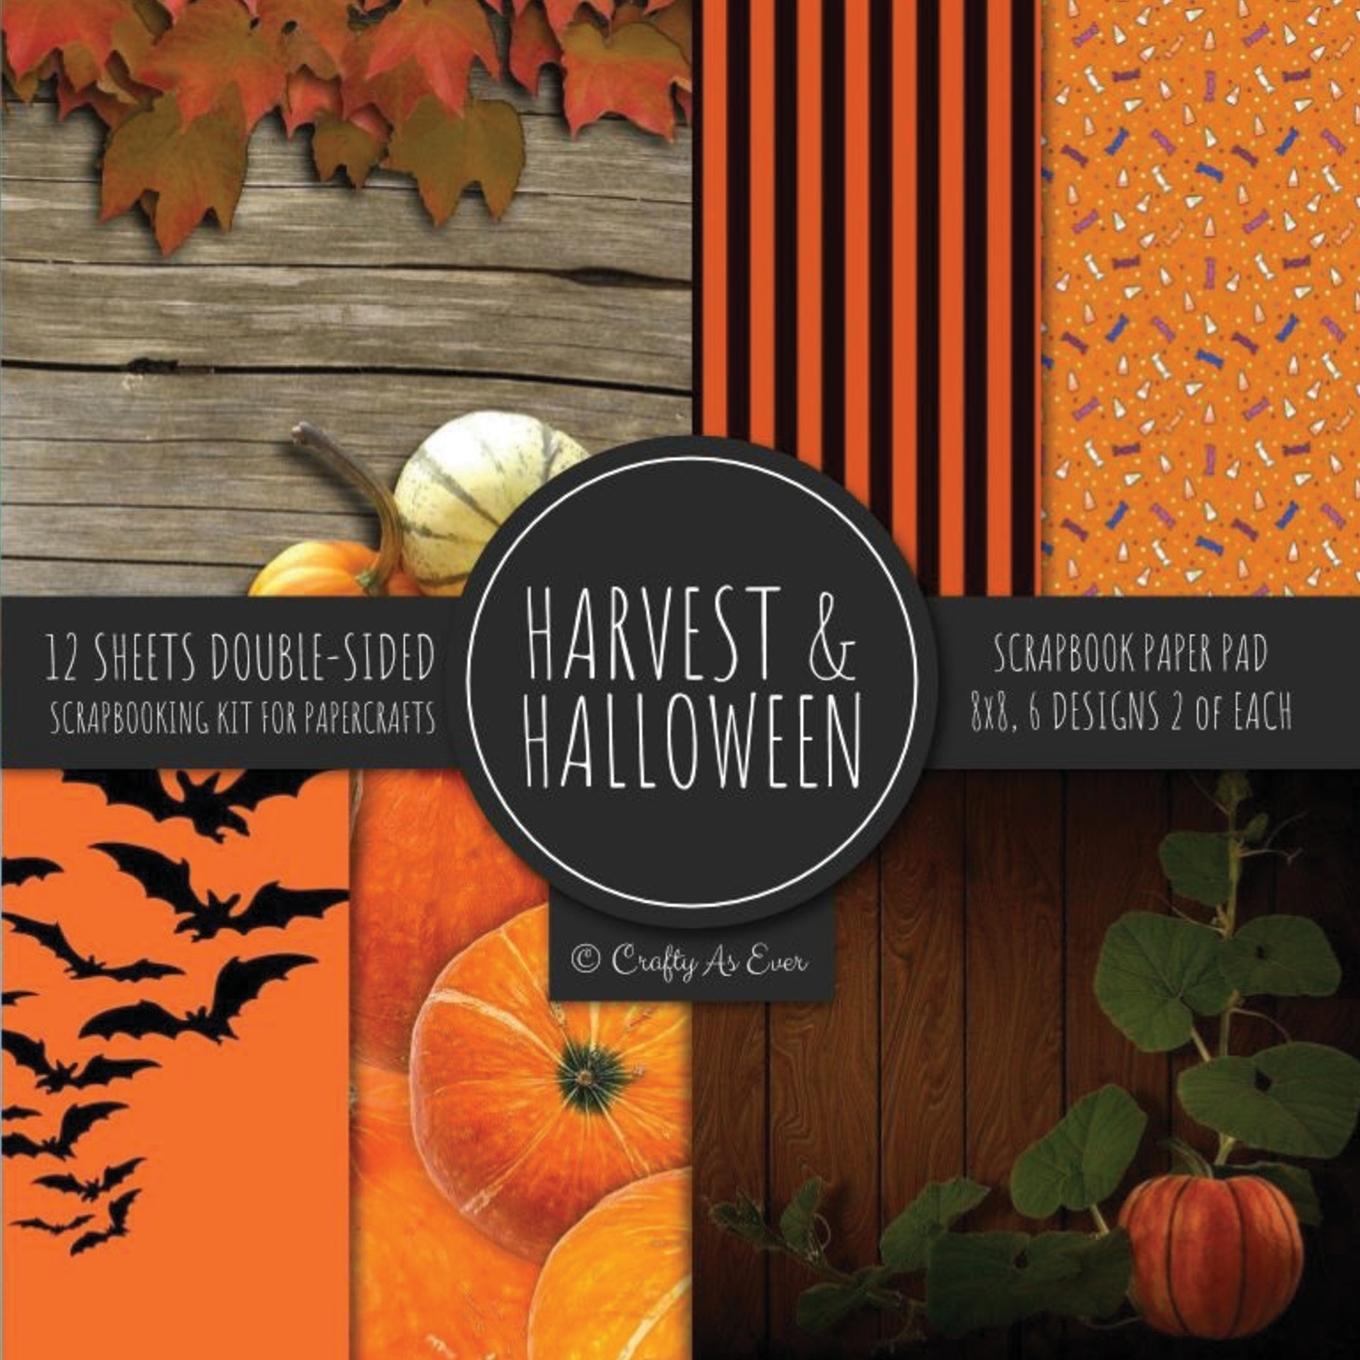 Kniha Harvest & Halloween Scrapbook Paper Pad 8x8 Scrapbooking Kit for Papercrafts, Cardmaking, Printmaking, DIY Crafts, Orange Holiday Themed, Designs, Bor Crafty as Ever